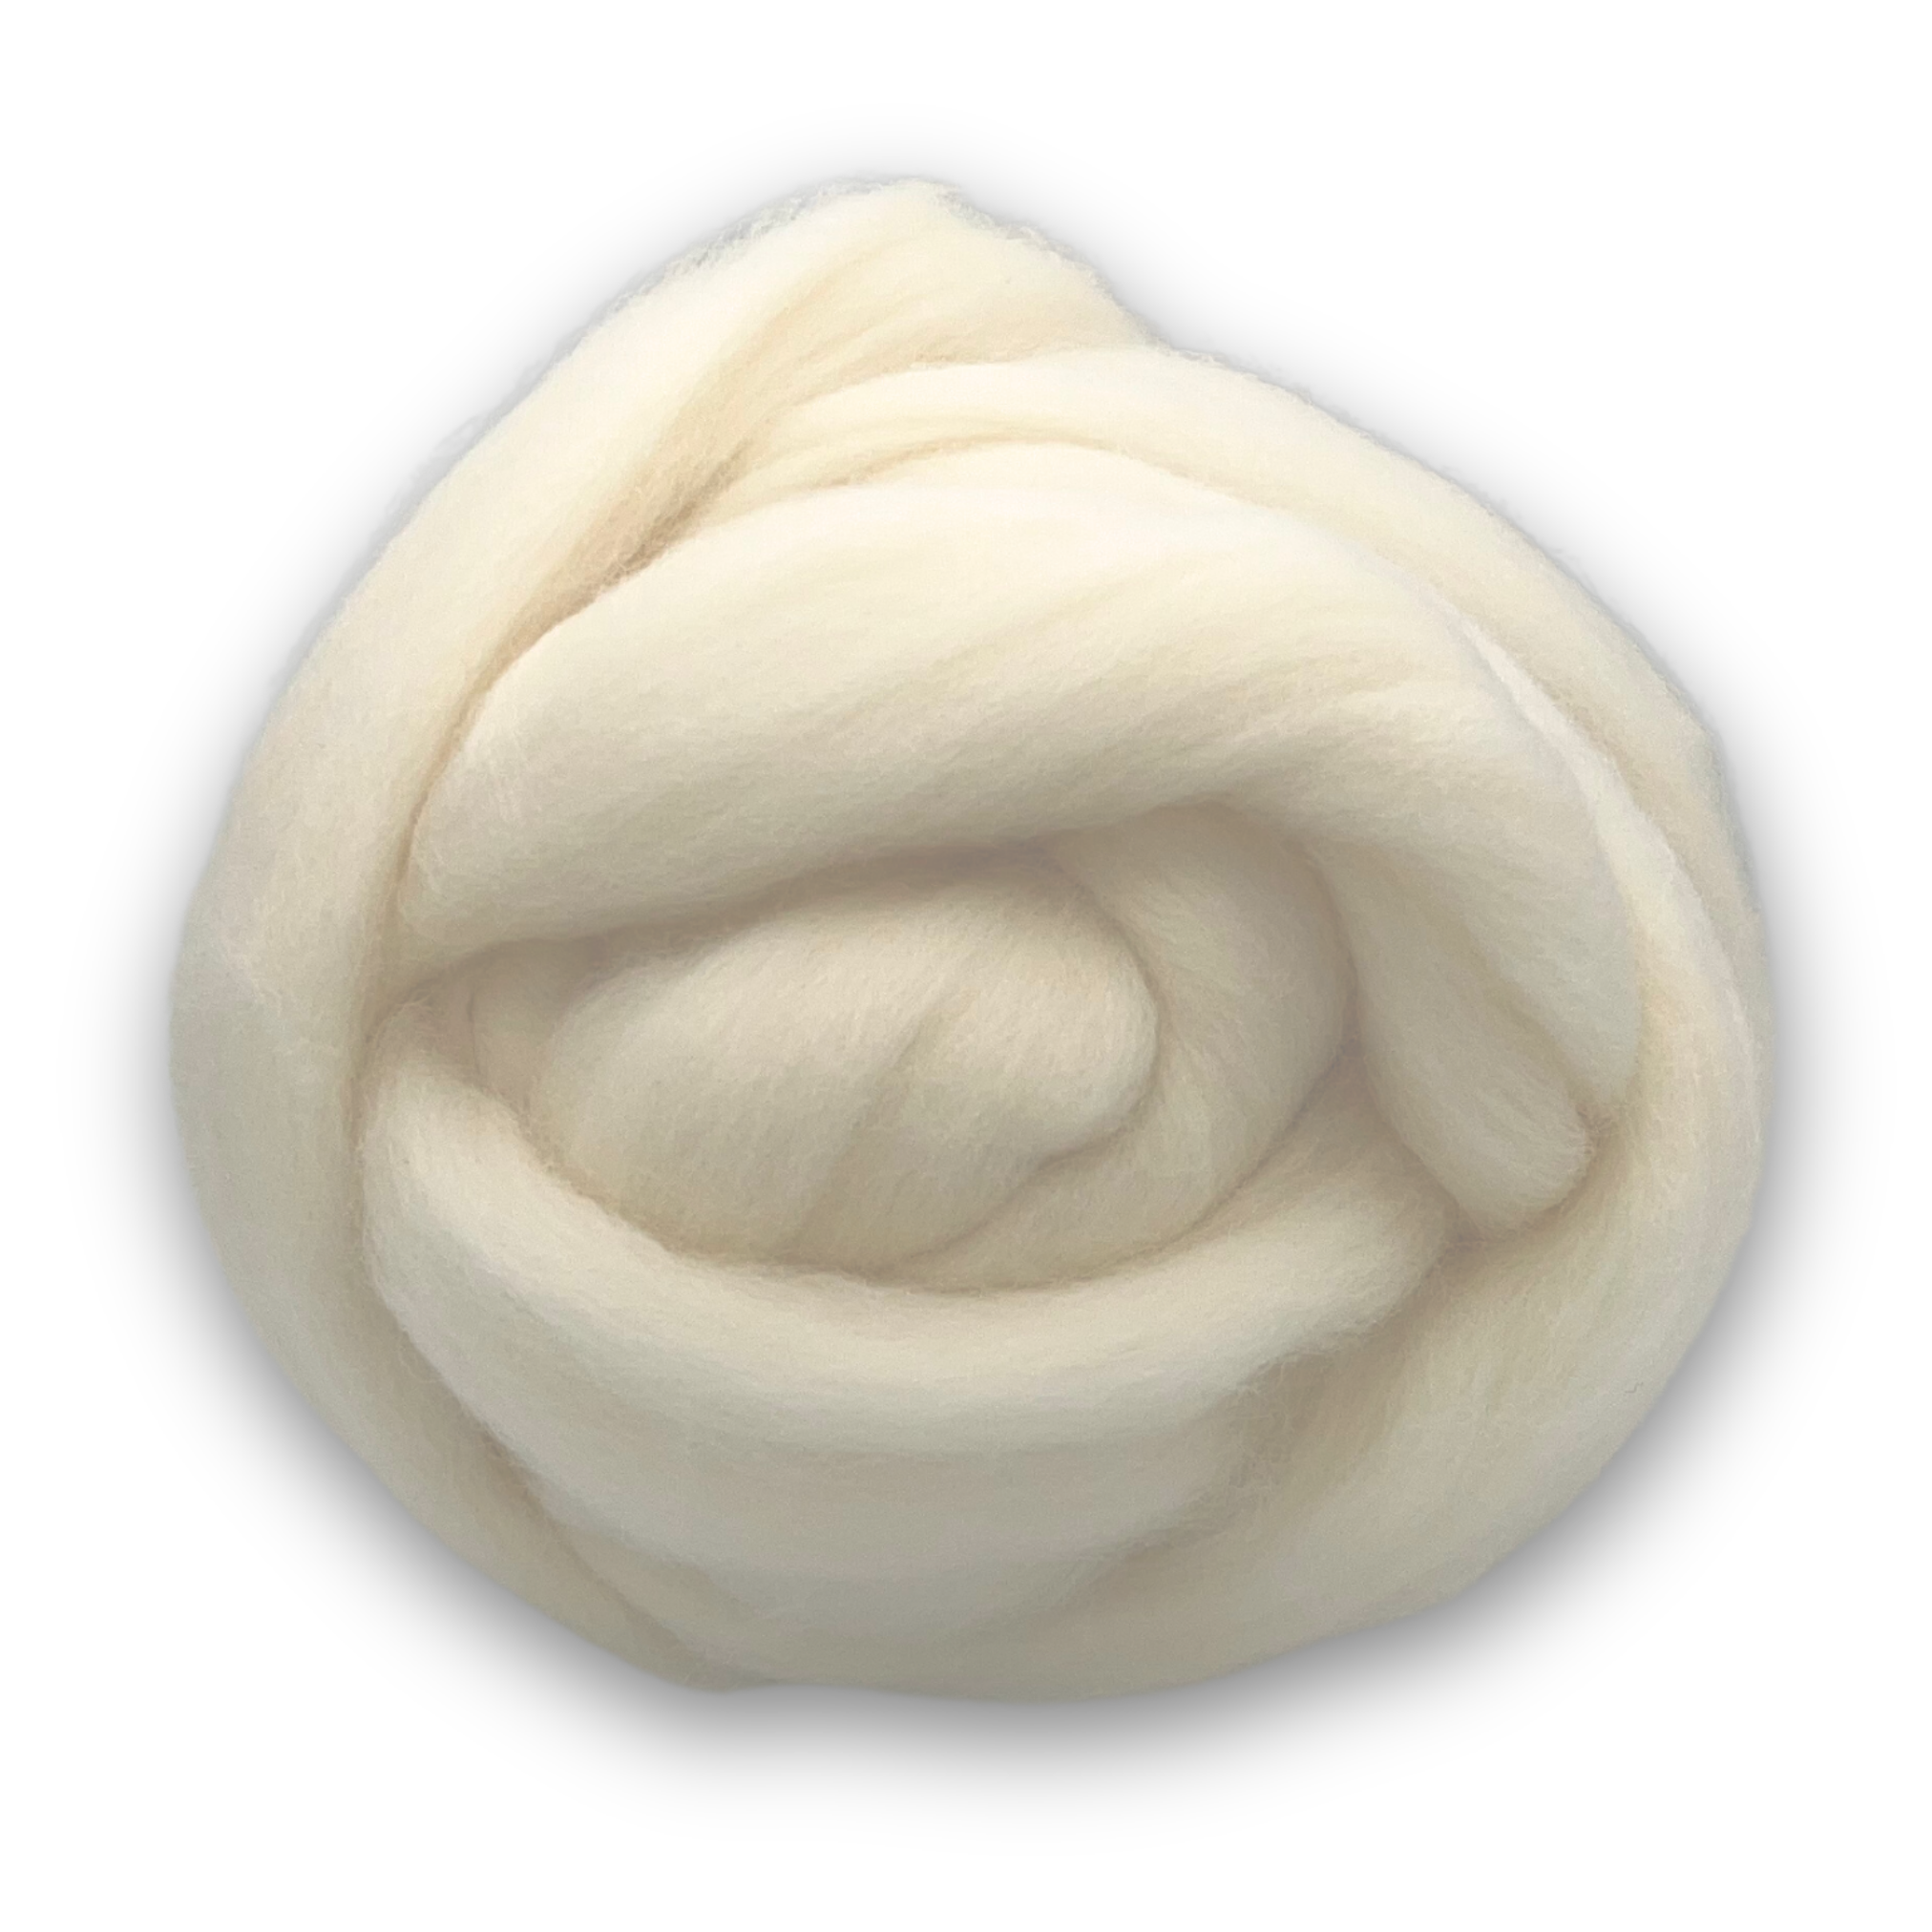 Revolution Fibers Corriedale Wool Roving 1 lb (16 ounces) for Spinning | Soft Chunky Jumbo Yarn for Arm Knitting Blanket |100% Natural Undyed